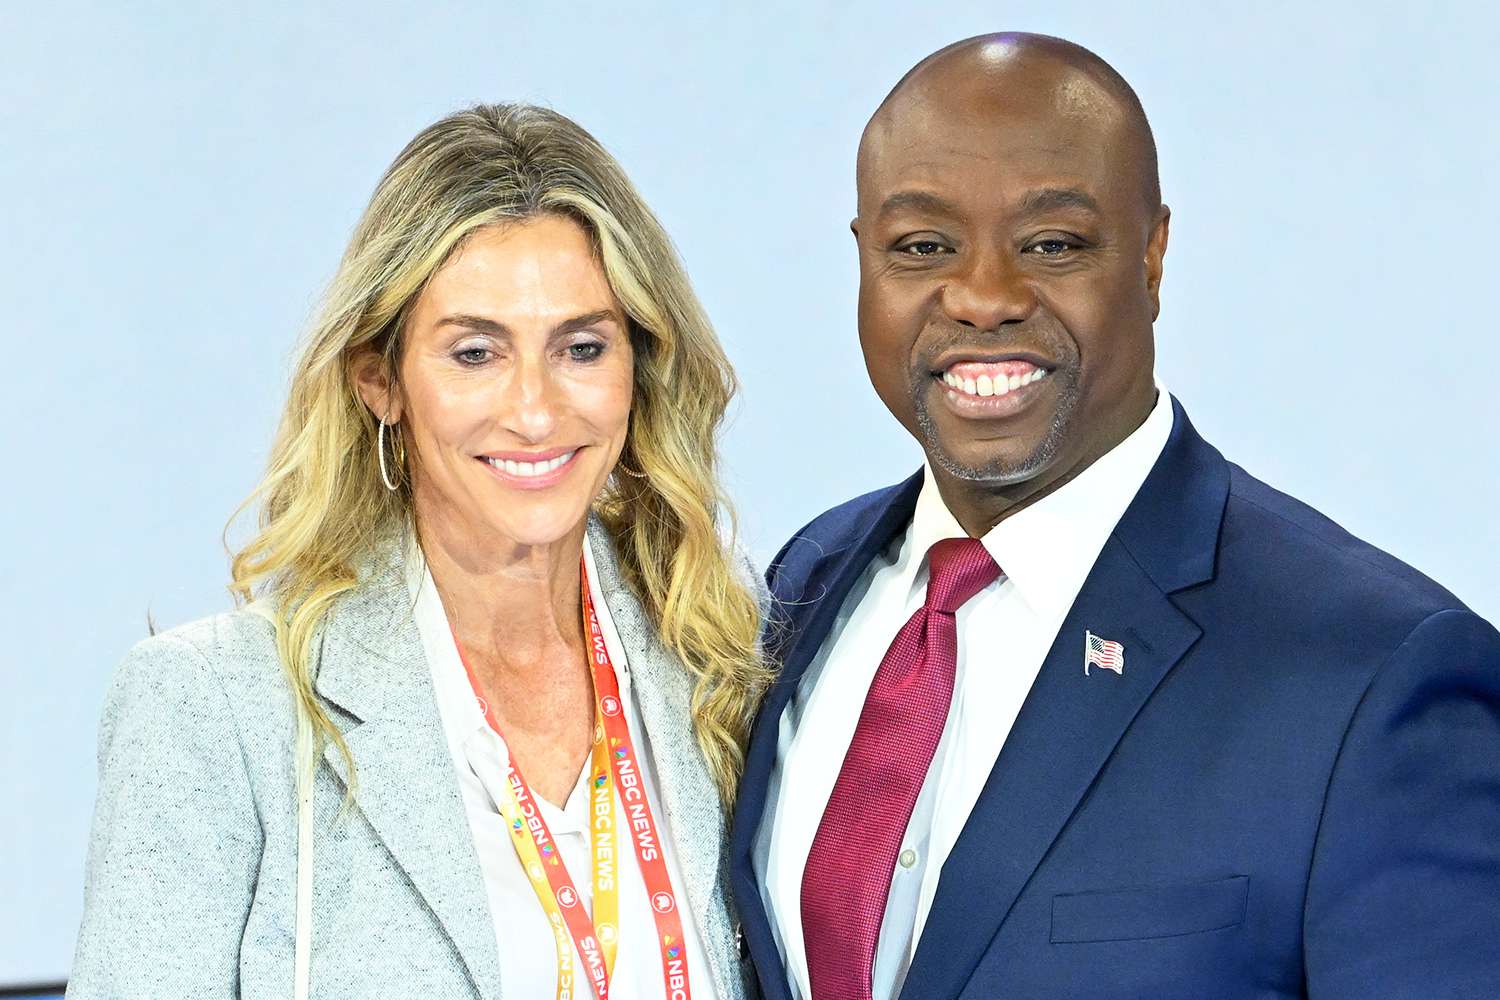 Who Is Tim Scott’s Fiancée? All About Mindy Noce